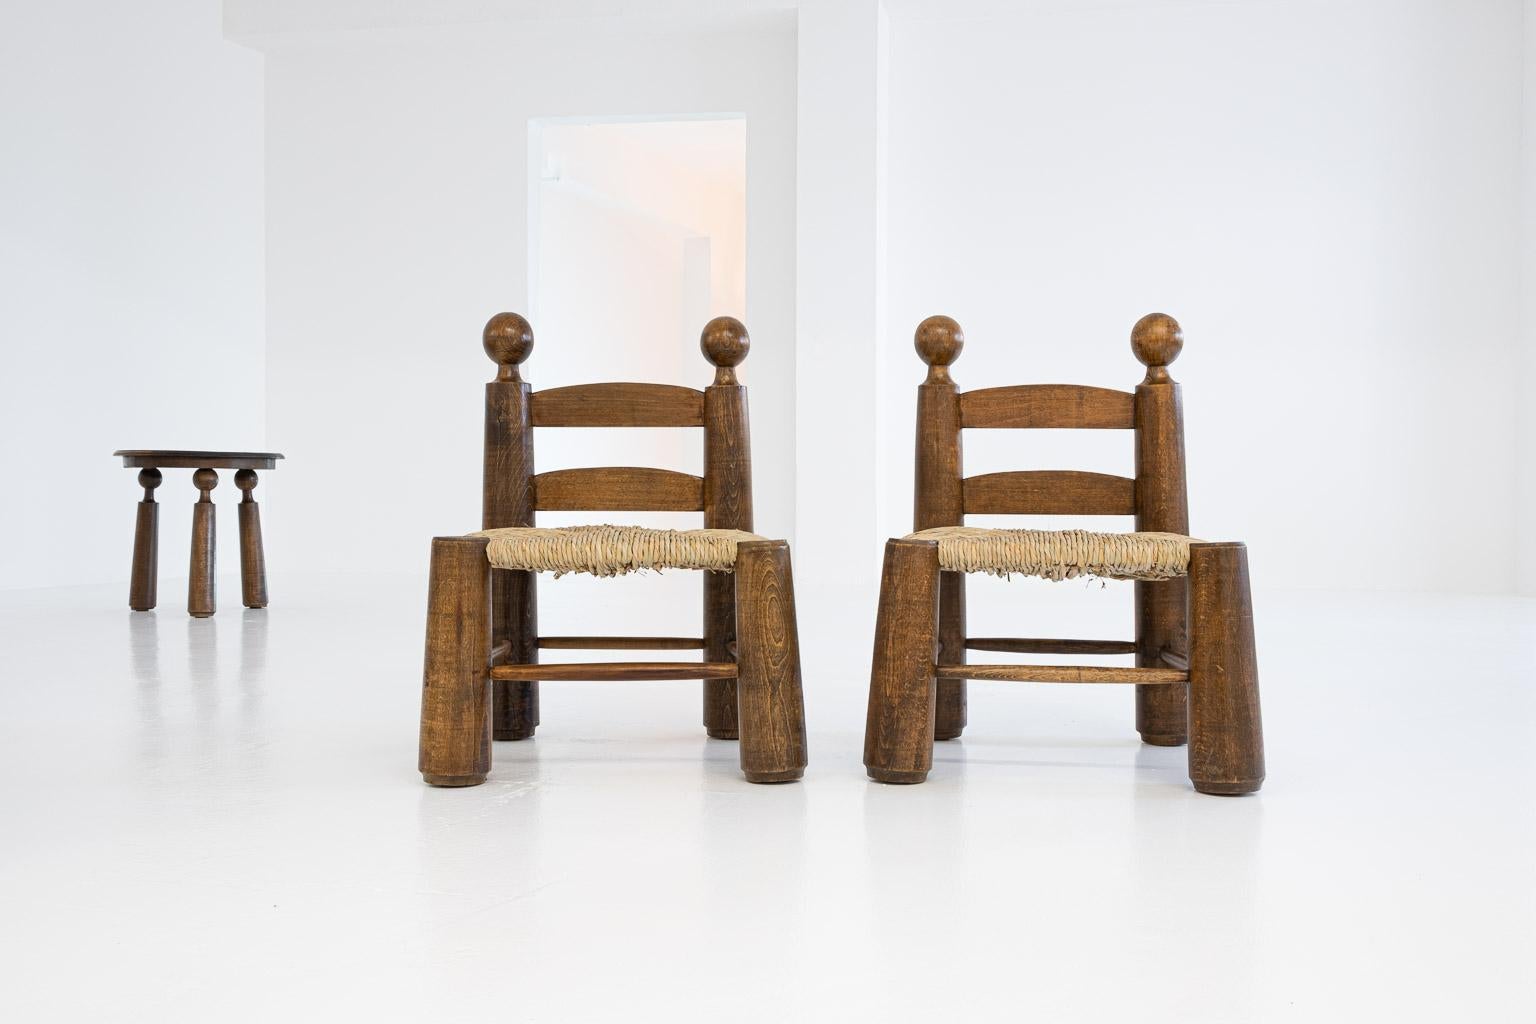 French Modern Rustic, Brutalistic Table / Chair Set by Charles Dudouyt, France, 1940s For Sale